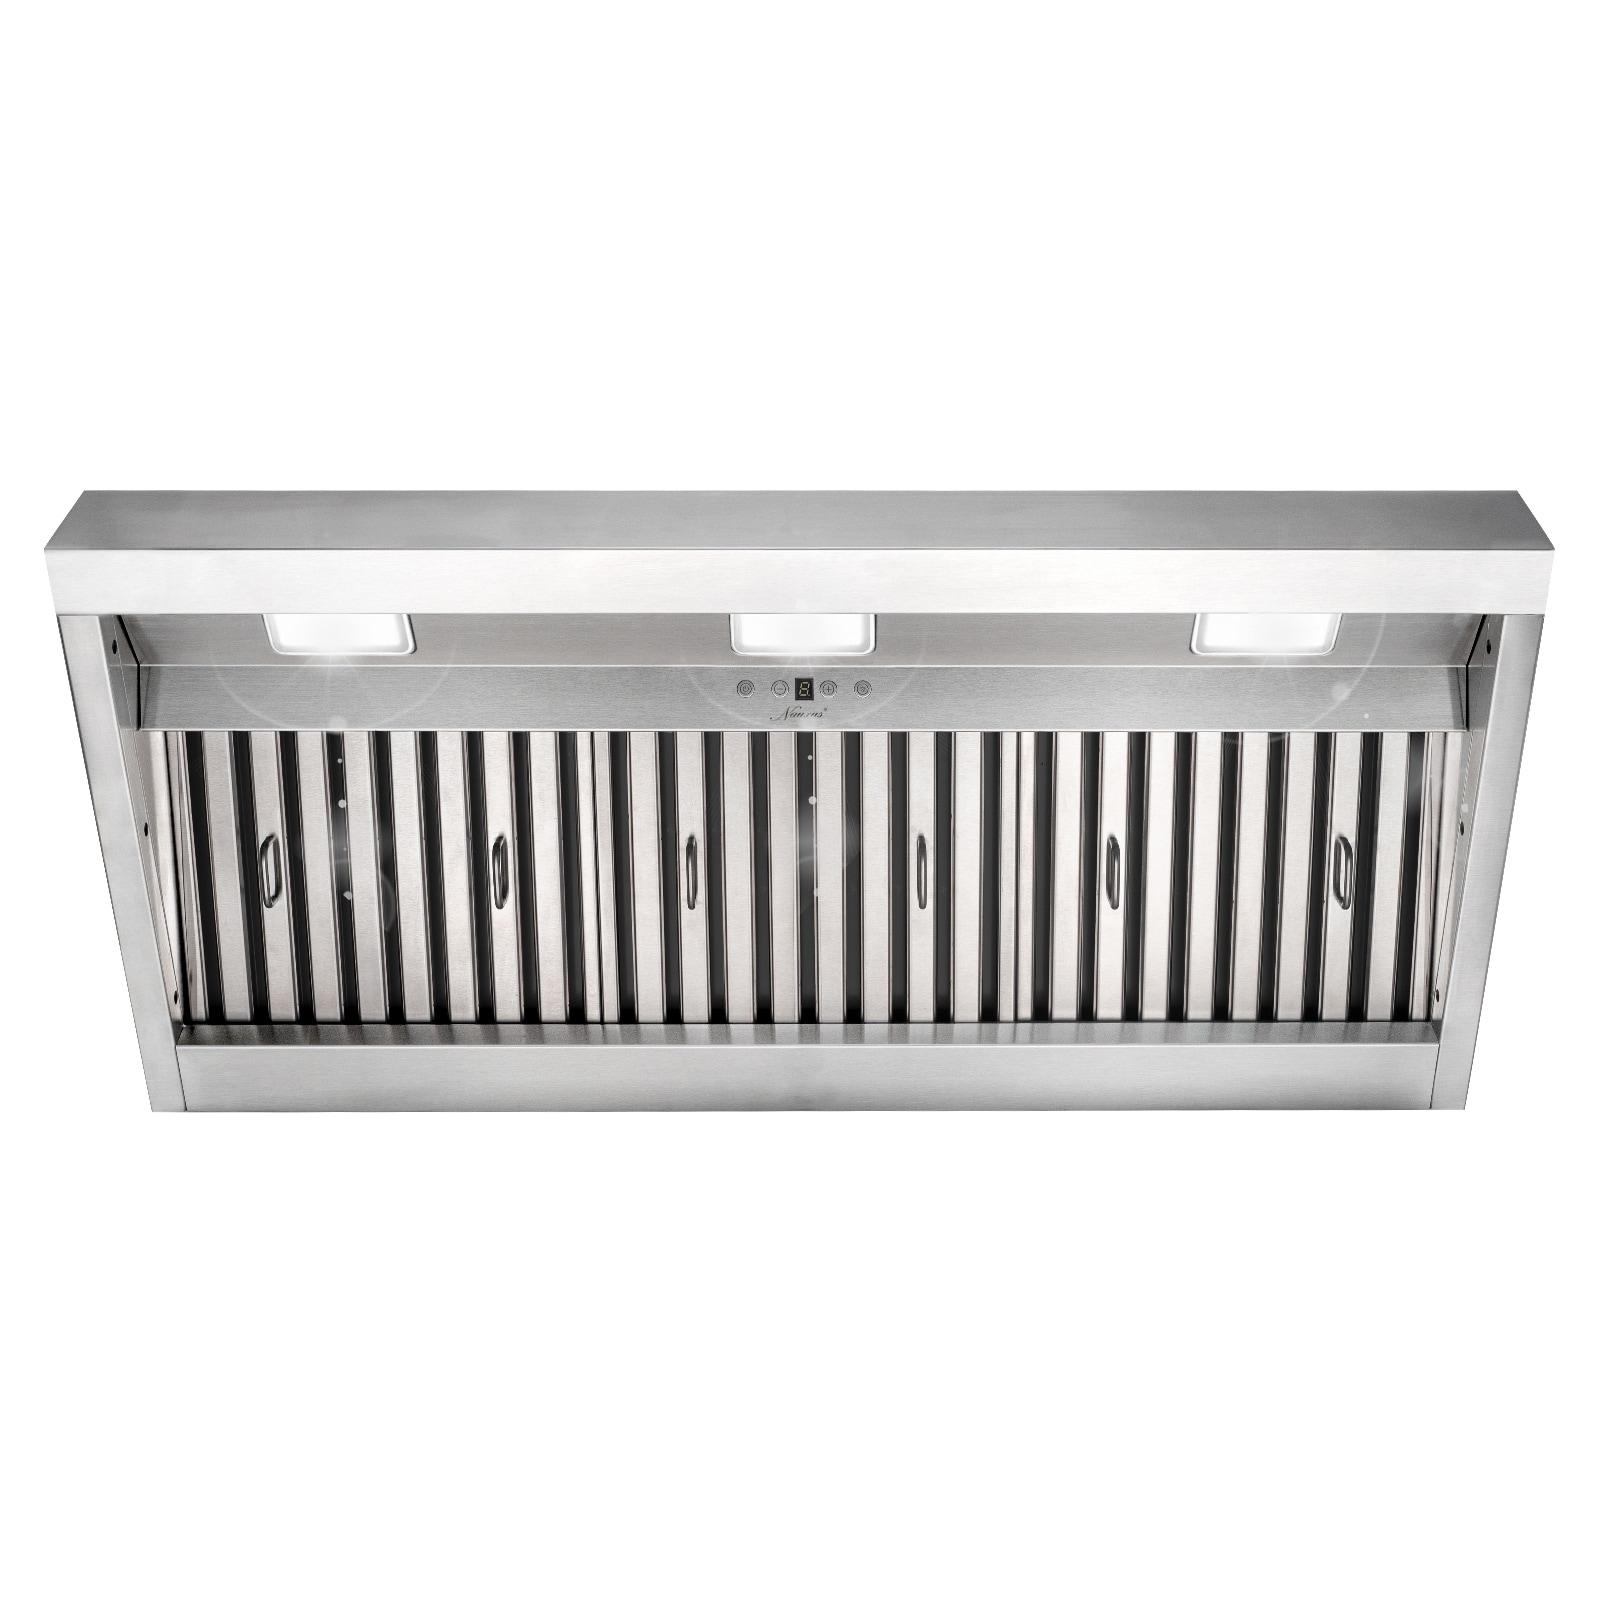 42-in 1200-CFM Ducted Stainless Steel Under Cabinet Range Hoods Insert | - Akicon 19IL-42-COOL